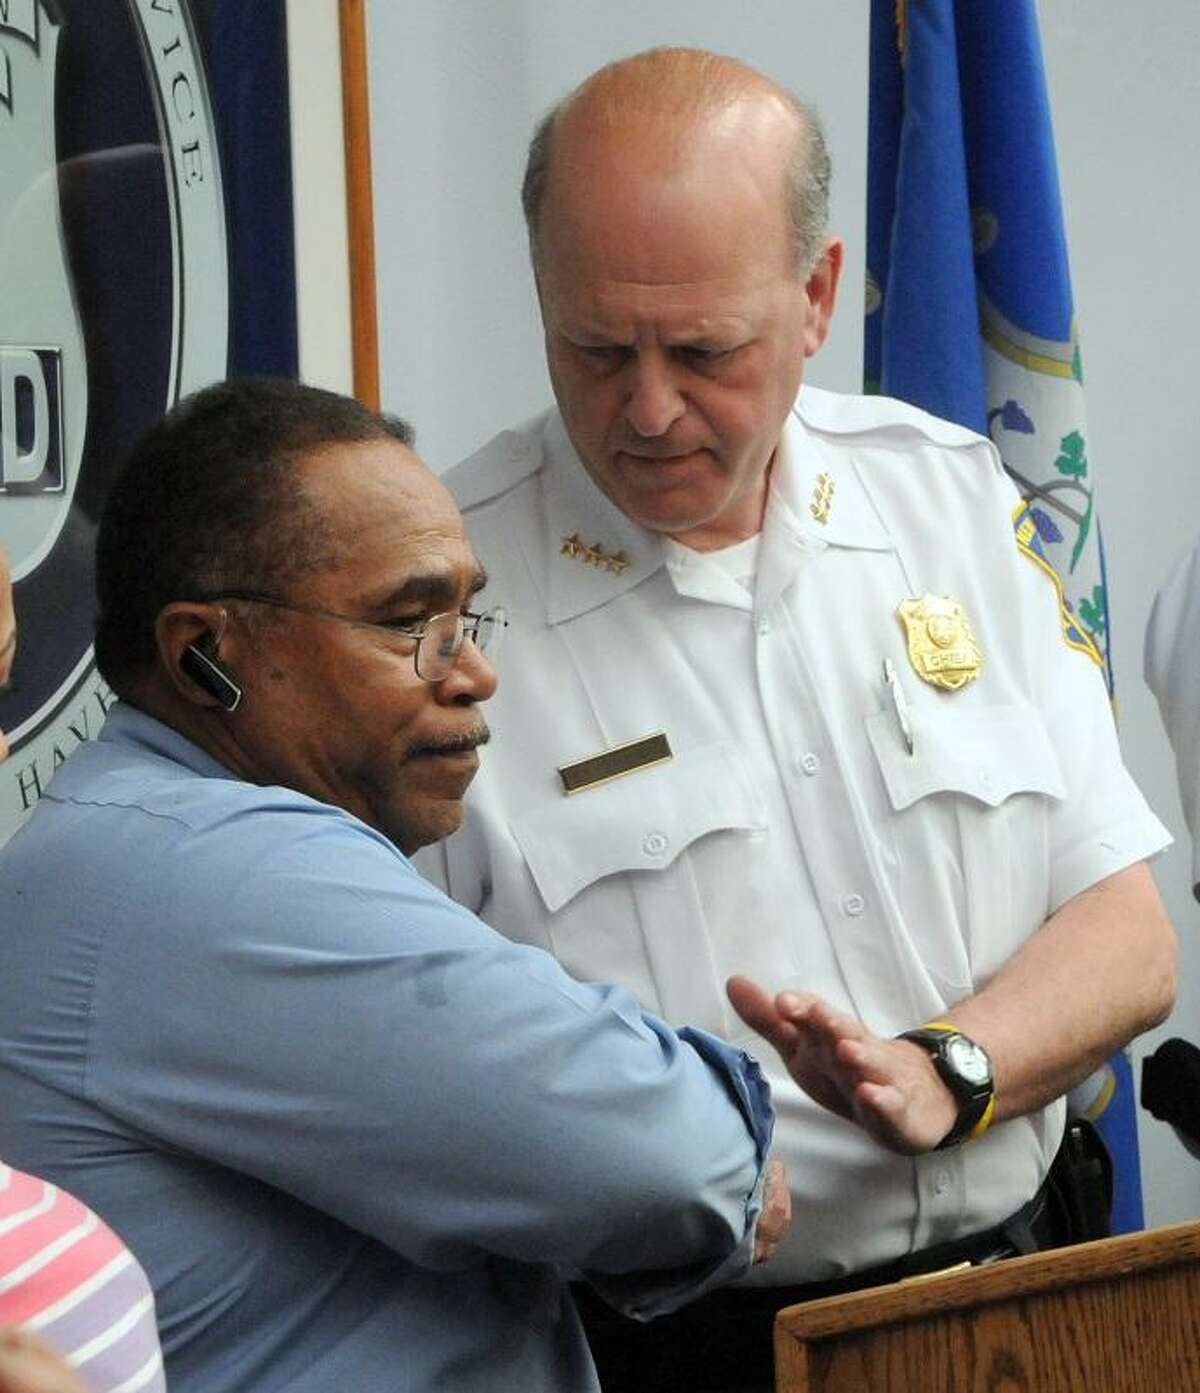 Hector Garcia, left, father of Christian Anderson Garcia who had been murdered on October 2012, shakes the hand of New Haven Policwe hief Dean M. Esserman after Garcia thanked the New Haven Police Department Tuesday, May 7, 2013 during a press conference at police headquarters for the arrest yesterday of Rashid Johnson who was charged with Garcia's murder. Photo by Peter Hvizdak / New Haven Register